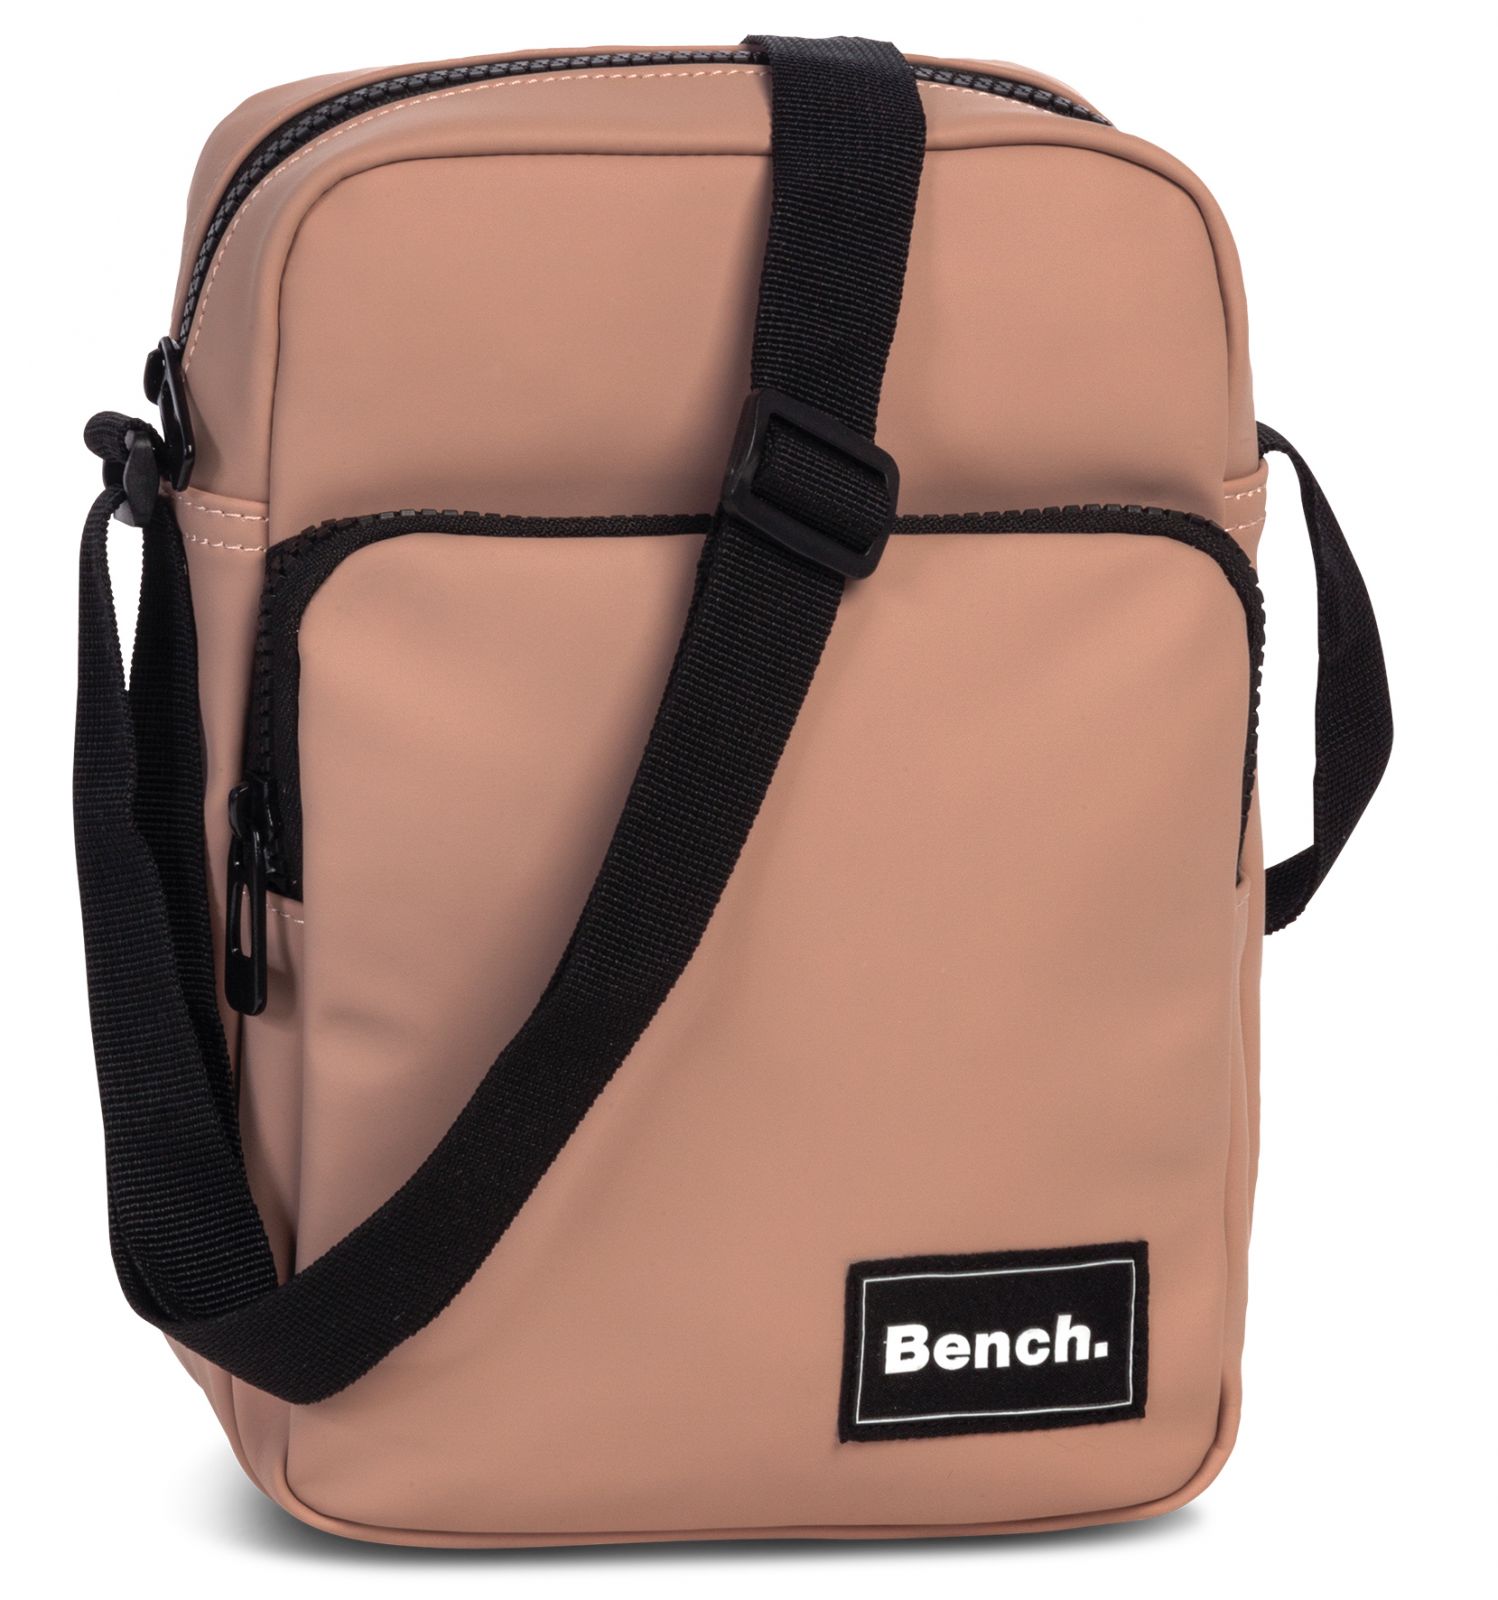 Bench - messenger ducky pink Hydro